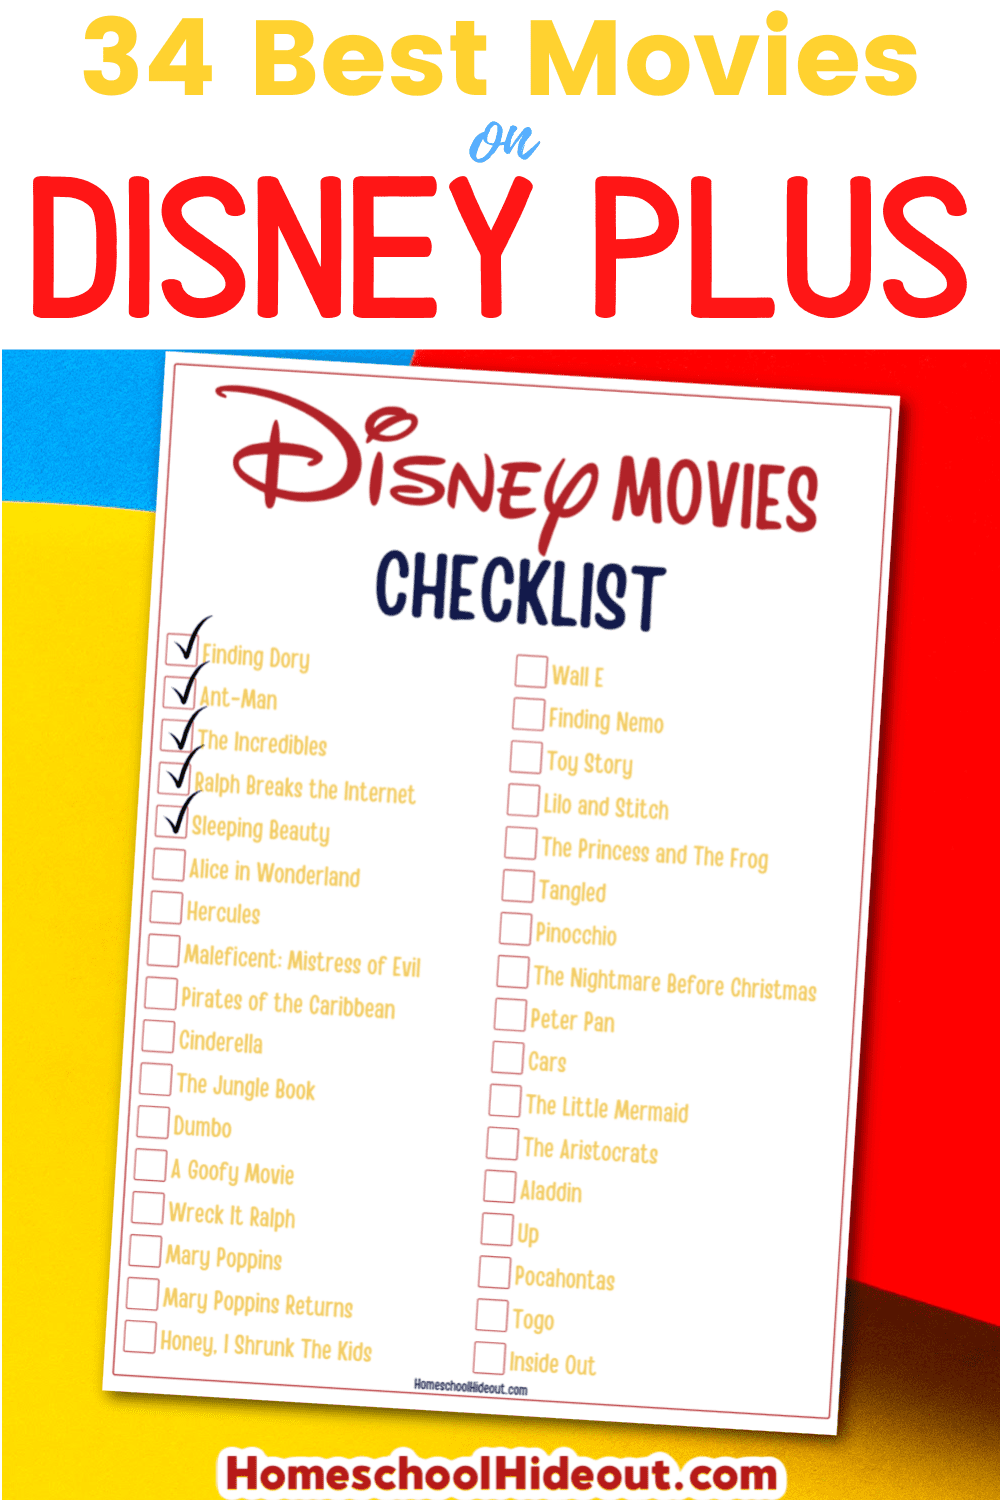 These are THE best movies on Disney Plus right now and I'm determined to watch every single one of them!